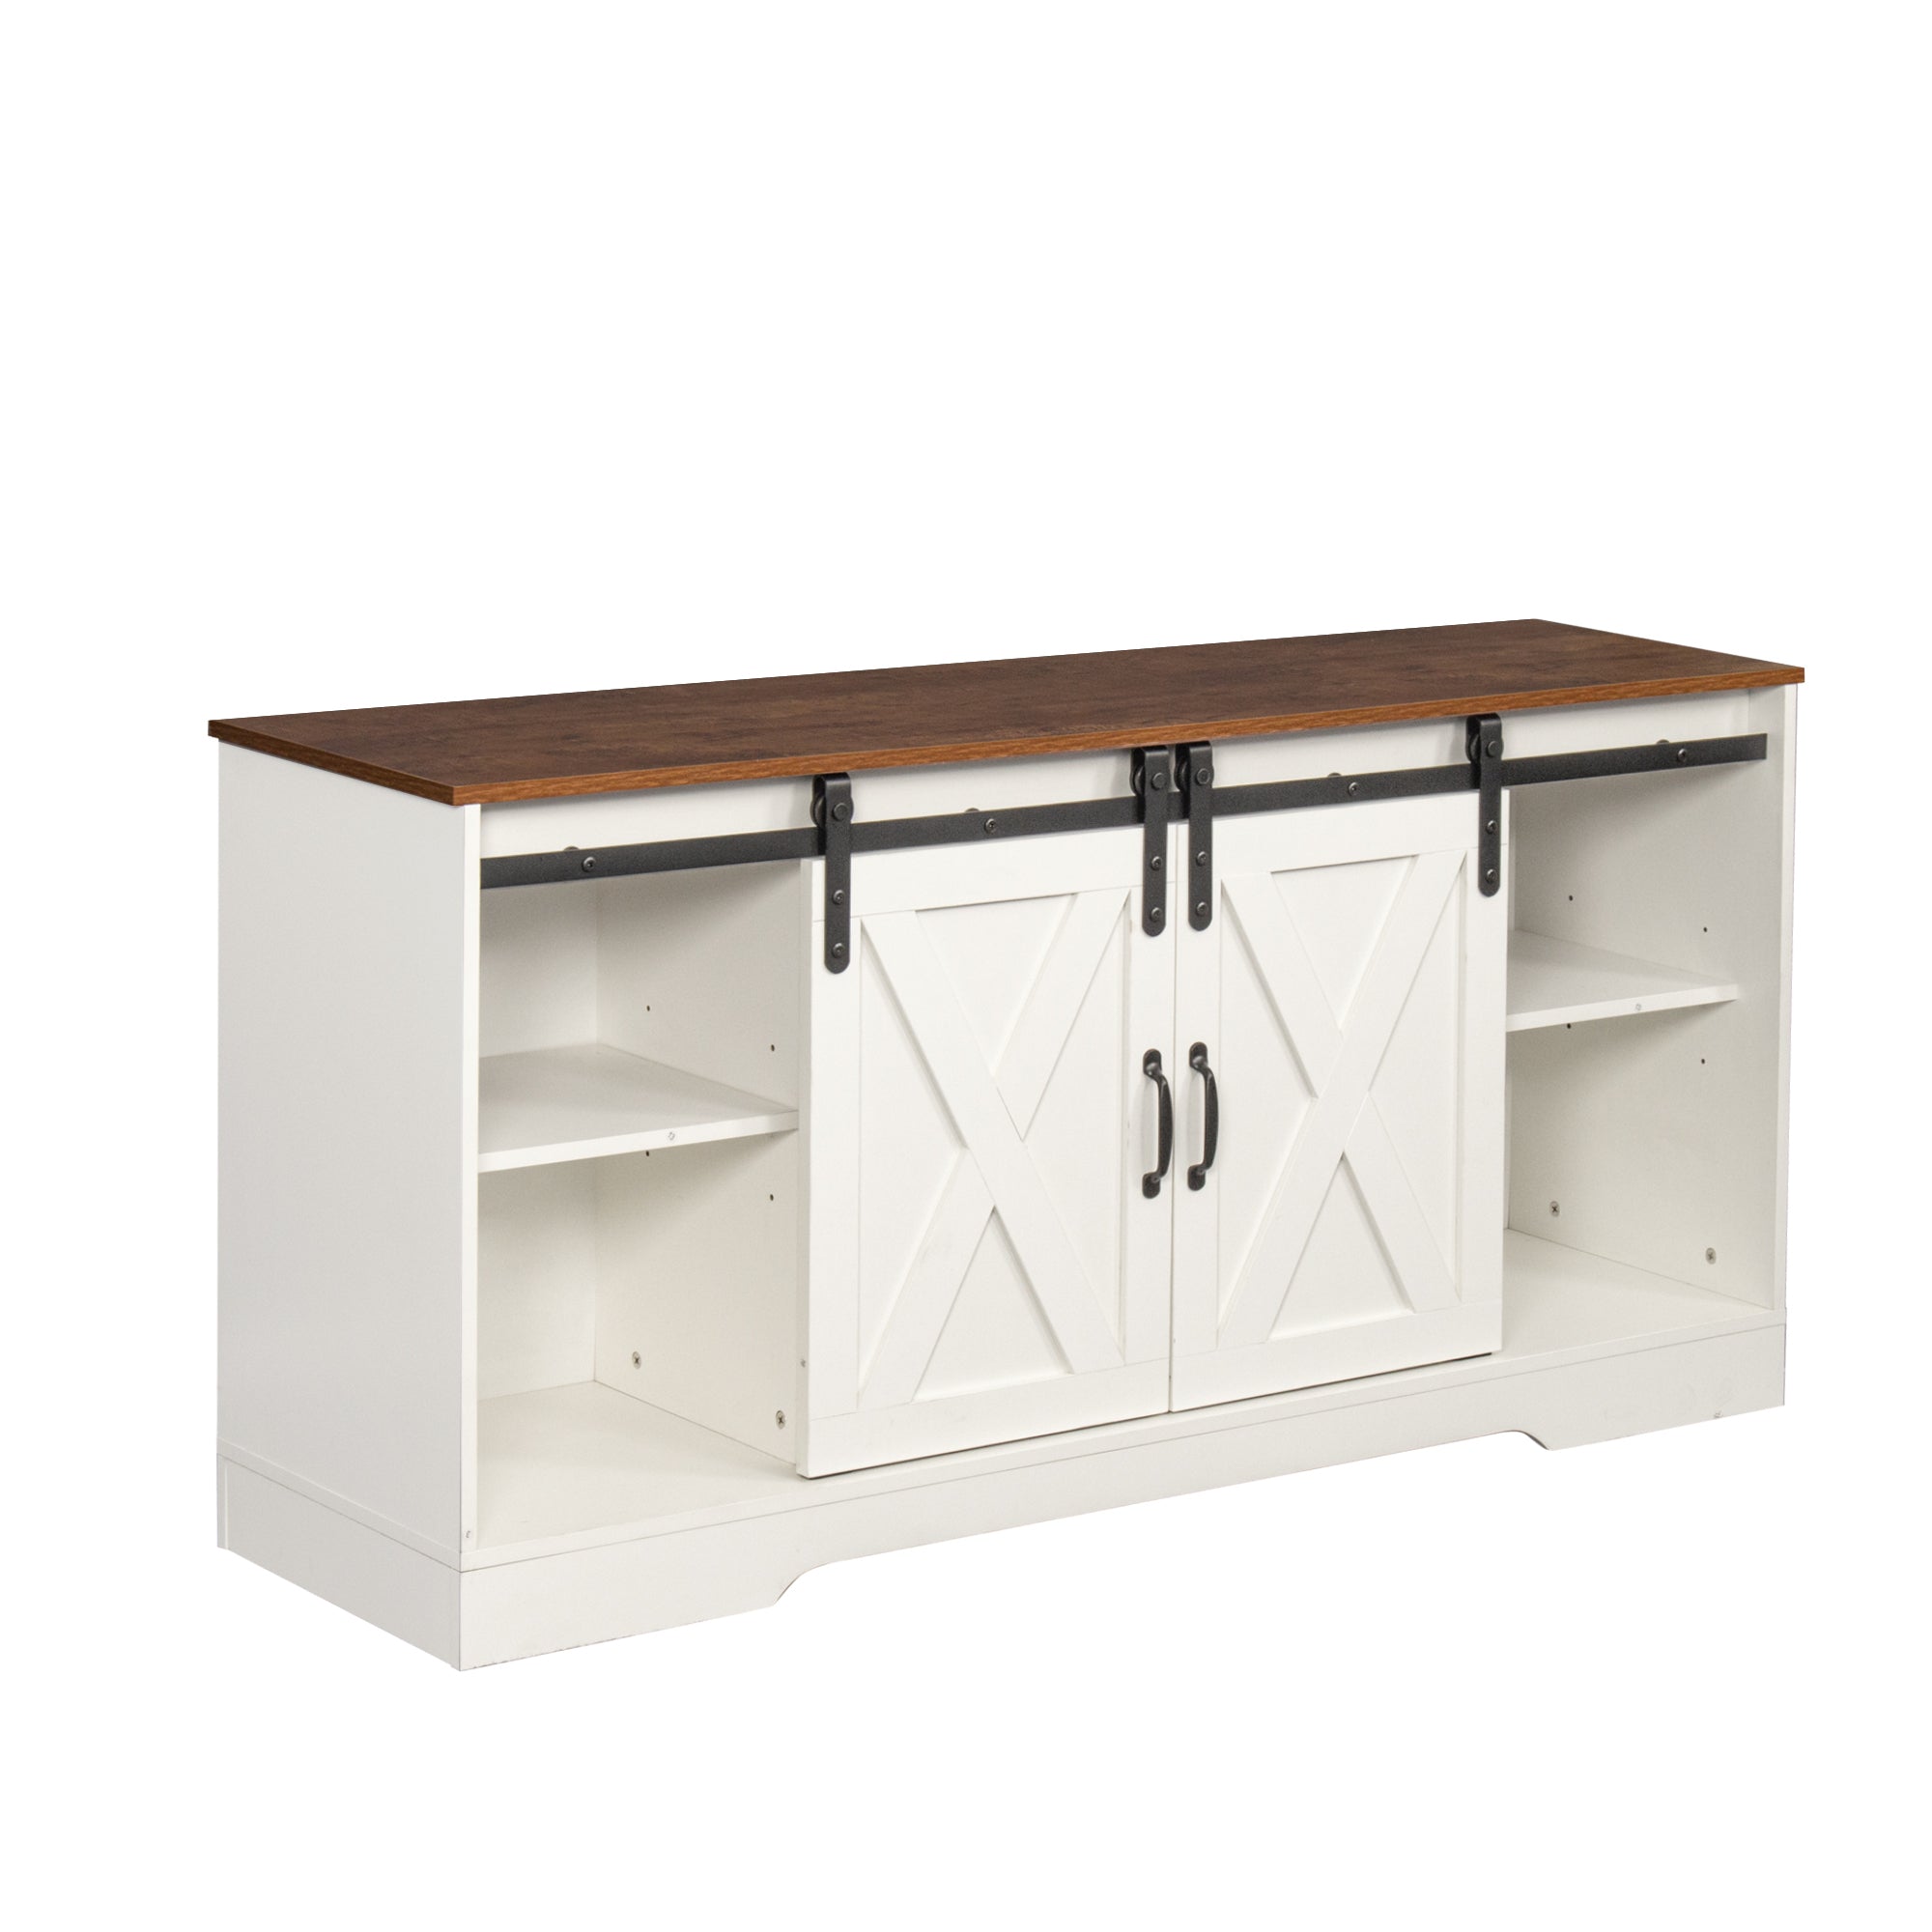 59" White Farmhouse TV Stand with Sliding Barn Door accommodate TVs up to 65"